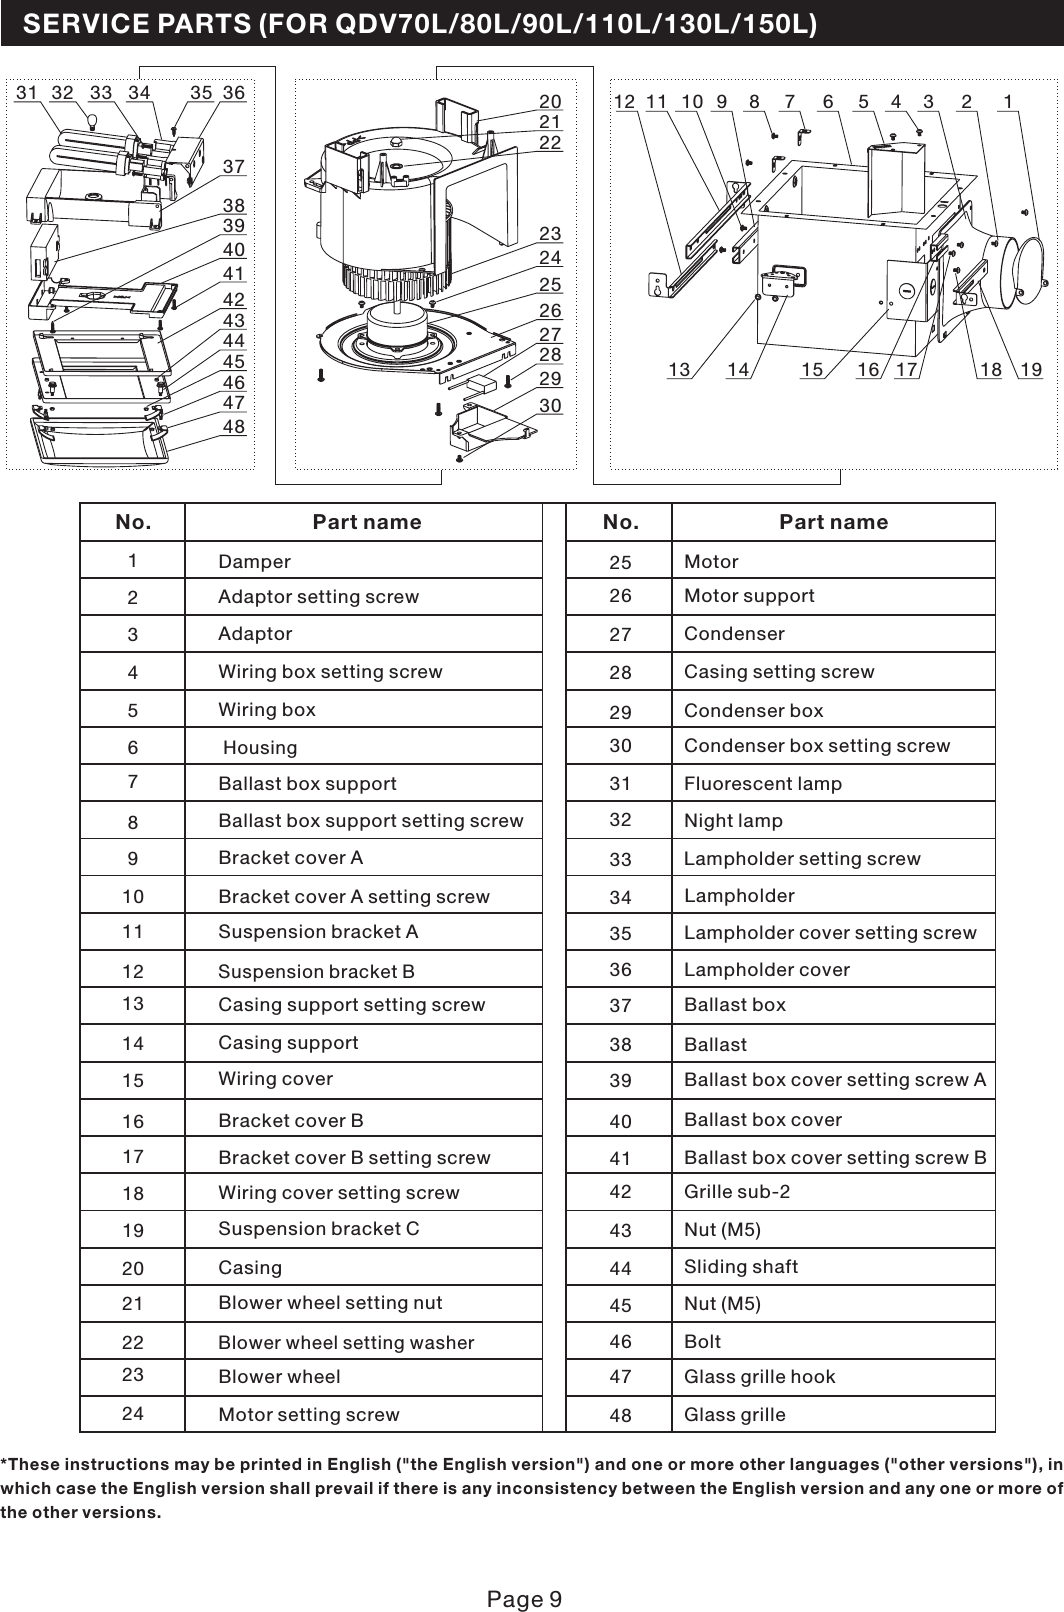 SERVICE PARTS (FOR QDV70L/80L/90L/110L/130L/150L)*These instructions may be printed in English (&quot;the English version&quot;) and one or more other languages (&quot;other versions&quot;), inwhich case the English version shall prevail if there is any inconsistency between the English version and any one or more ofthe other versions.202122232425262728293078 4569101112 3 213114 15 16 17 18 19363531 32 33 34373839404142434445484647No. Part name No. Part nameDamperCasing setting screwAdaptor setting screwWiring box setting screwWiring boxMotorMotor supportCondenser291234562526272830AdaptorCondenser boxCondenser box setting screwHousingBallast box supportLampholderBallast box support setting screwBracket cover A setting screwSuspension bracket AFluorescent lampNight lampLampholder setting screw357891011123132333436Bracket cover ALampholder cover setting screwLampholder coverSuspension bracket BCasing support setting screwBallast box coverCasing supportBracket cover BBallast boxBallastBallast box cover setting screw A1314151637383940Wiring coverBracket cover B setting screwSliding shaftWiring cover setting screwCasingBlower wheel setting nutBallast box cover setting screw BGrille sub-2Nut (M5)451718192021224142434446Suspension bracket CNut (M5)BoltBlower wheel setting washerBlower wheel Glass grille hook23 47Motor setting screw Glass grille24 48Page 9